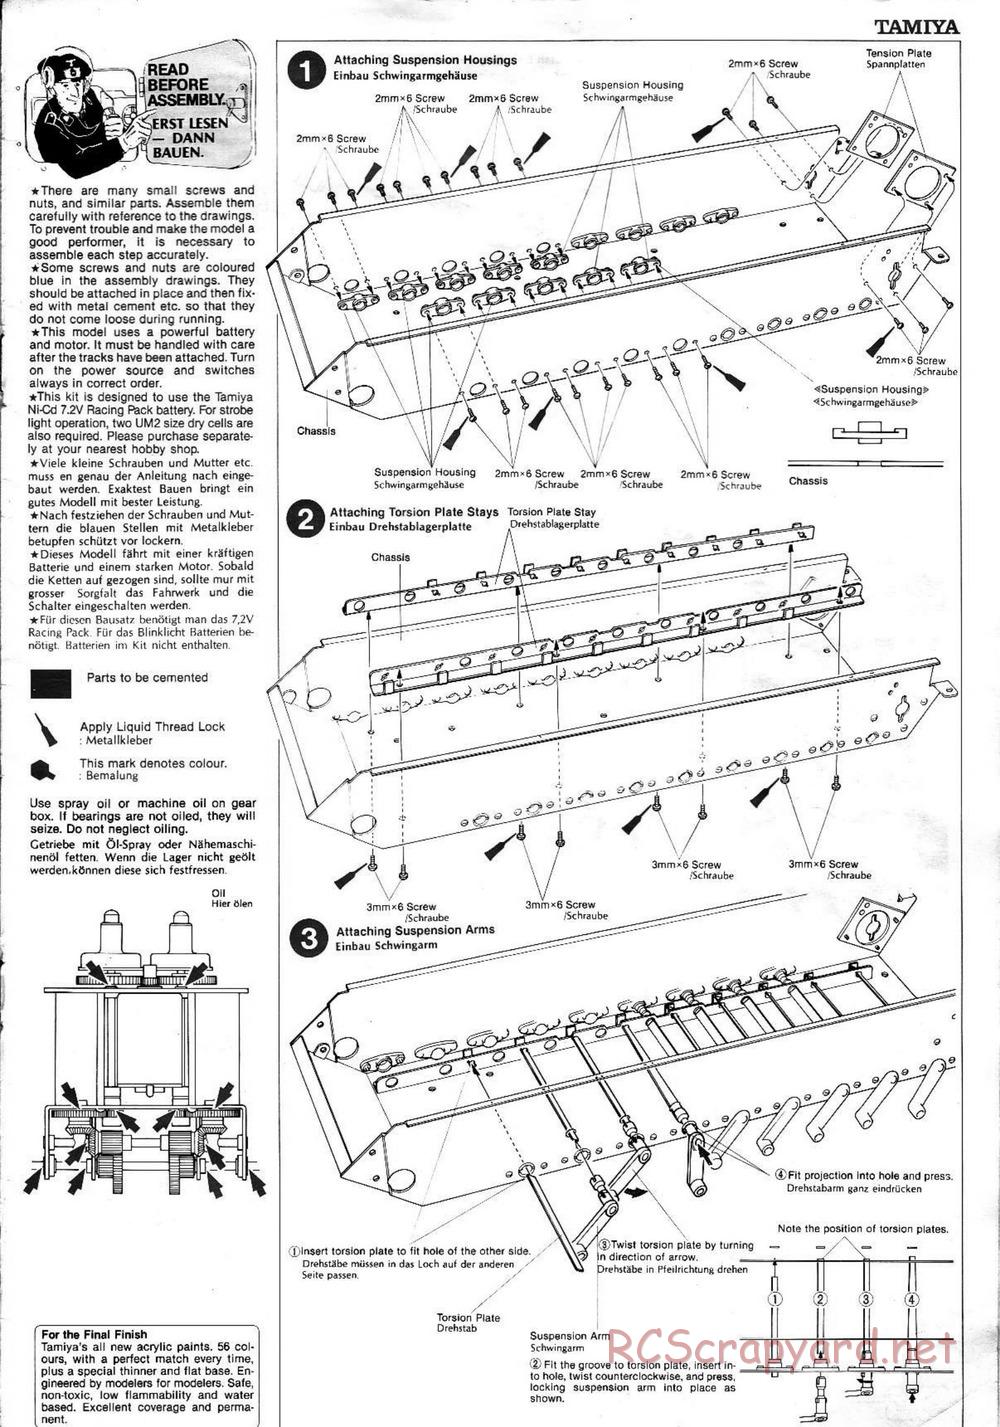 Tamiya - King Tiger (Production Turret) - 1/16 Scale Chassis - Manual - Page 3